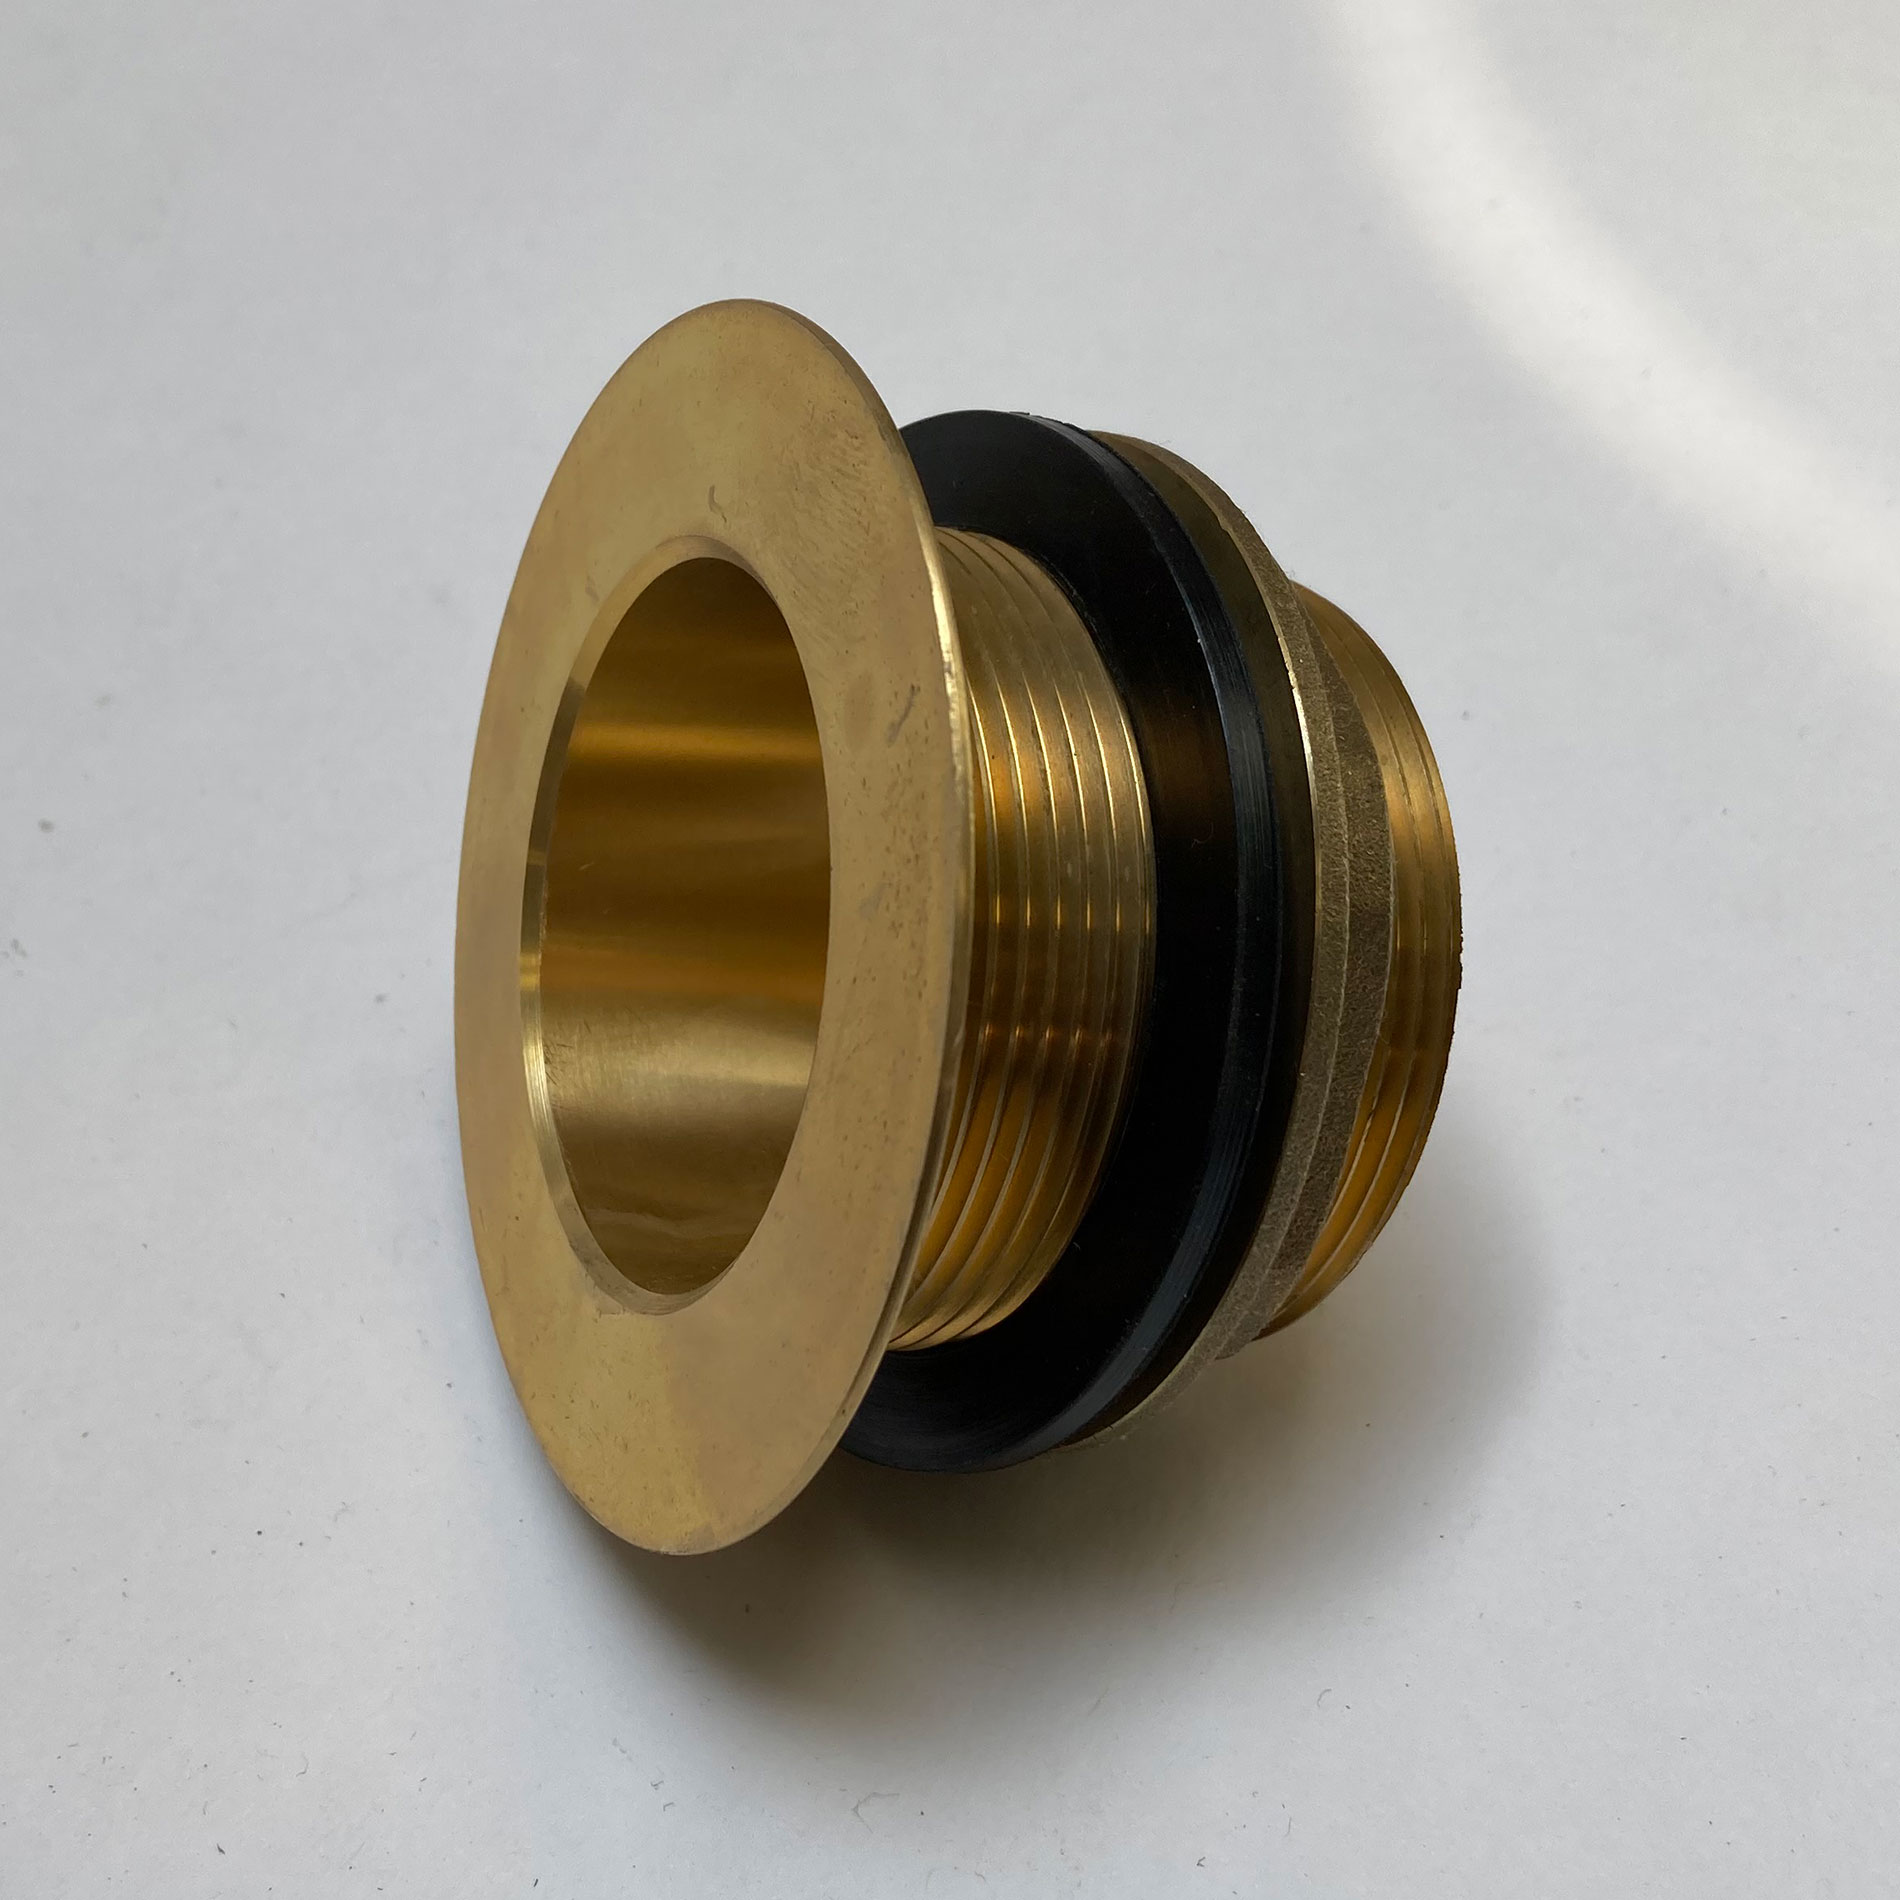 Brass Waste Drain with Locknut and Rubber Washer, #41-image